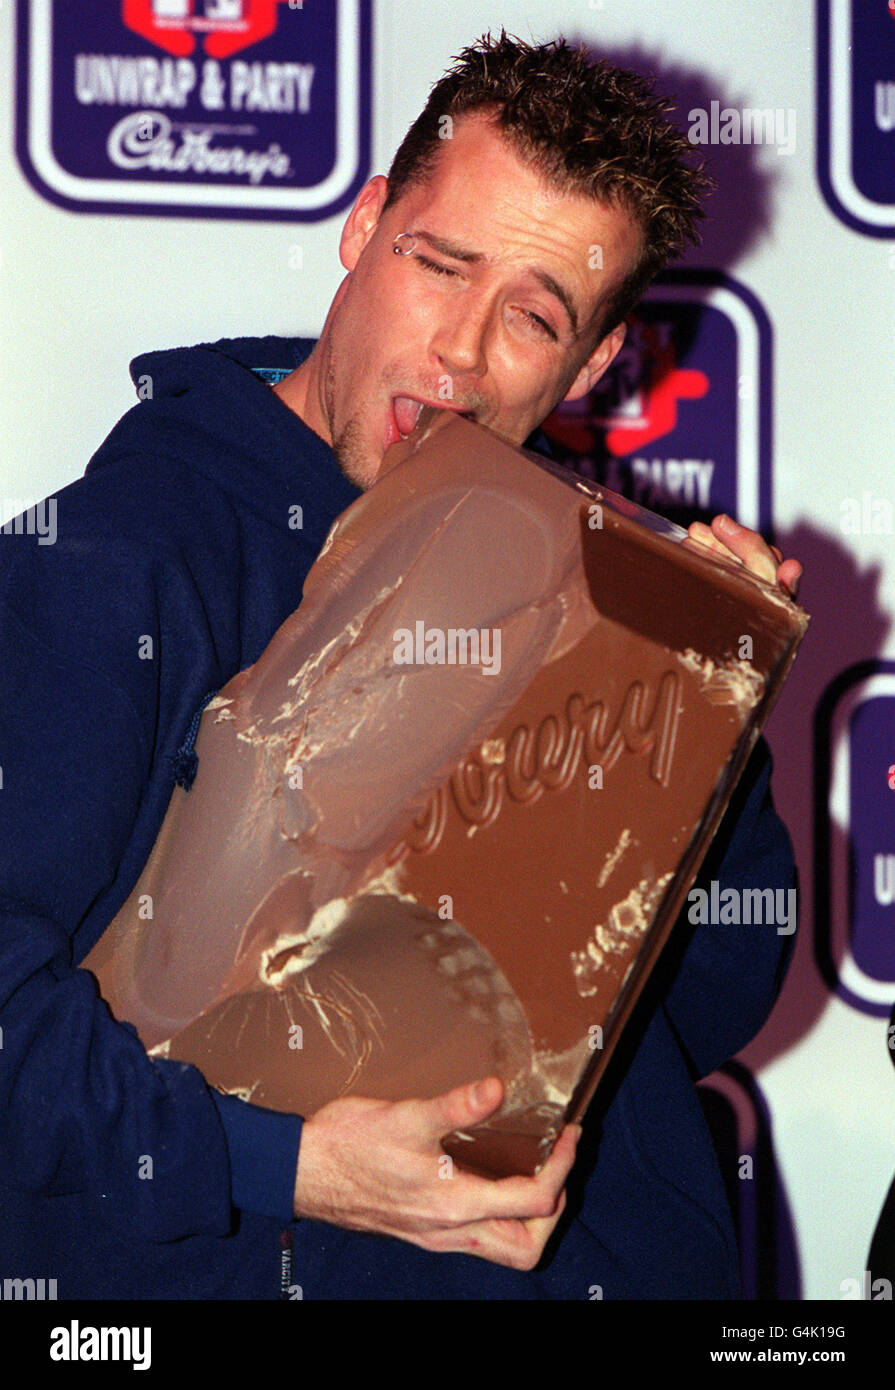 Jason Brown from the boy band Five, who tucked into the largest bar of Cadbury's Dairy Milk chocolate ever made at an MTV Select photocall in London to announce a secret pop event to be staged by the daily pop show later in the year. Stock Photo